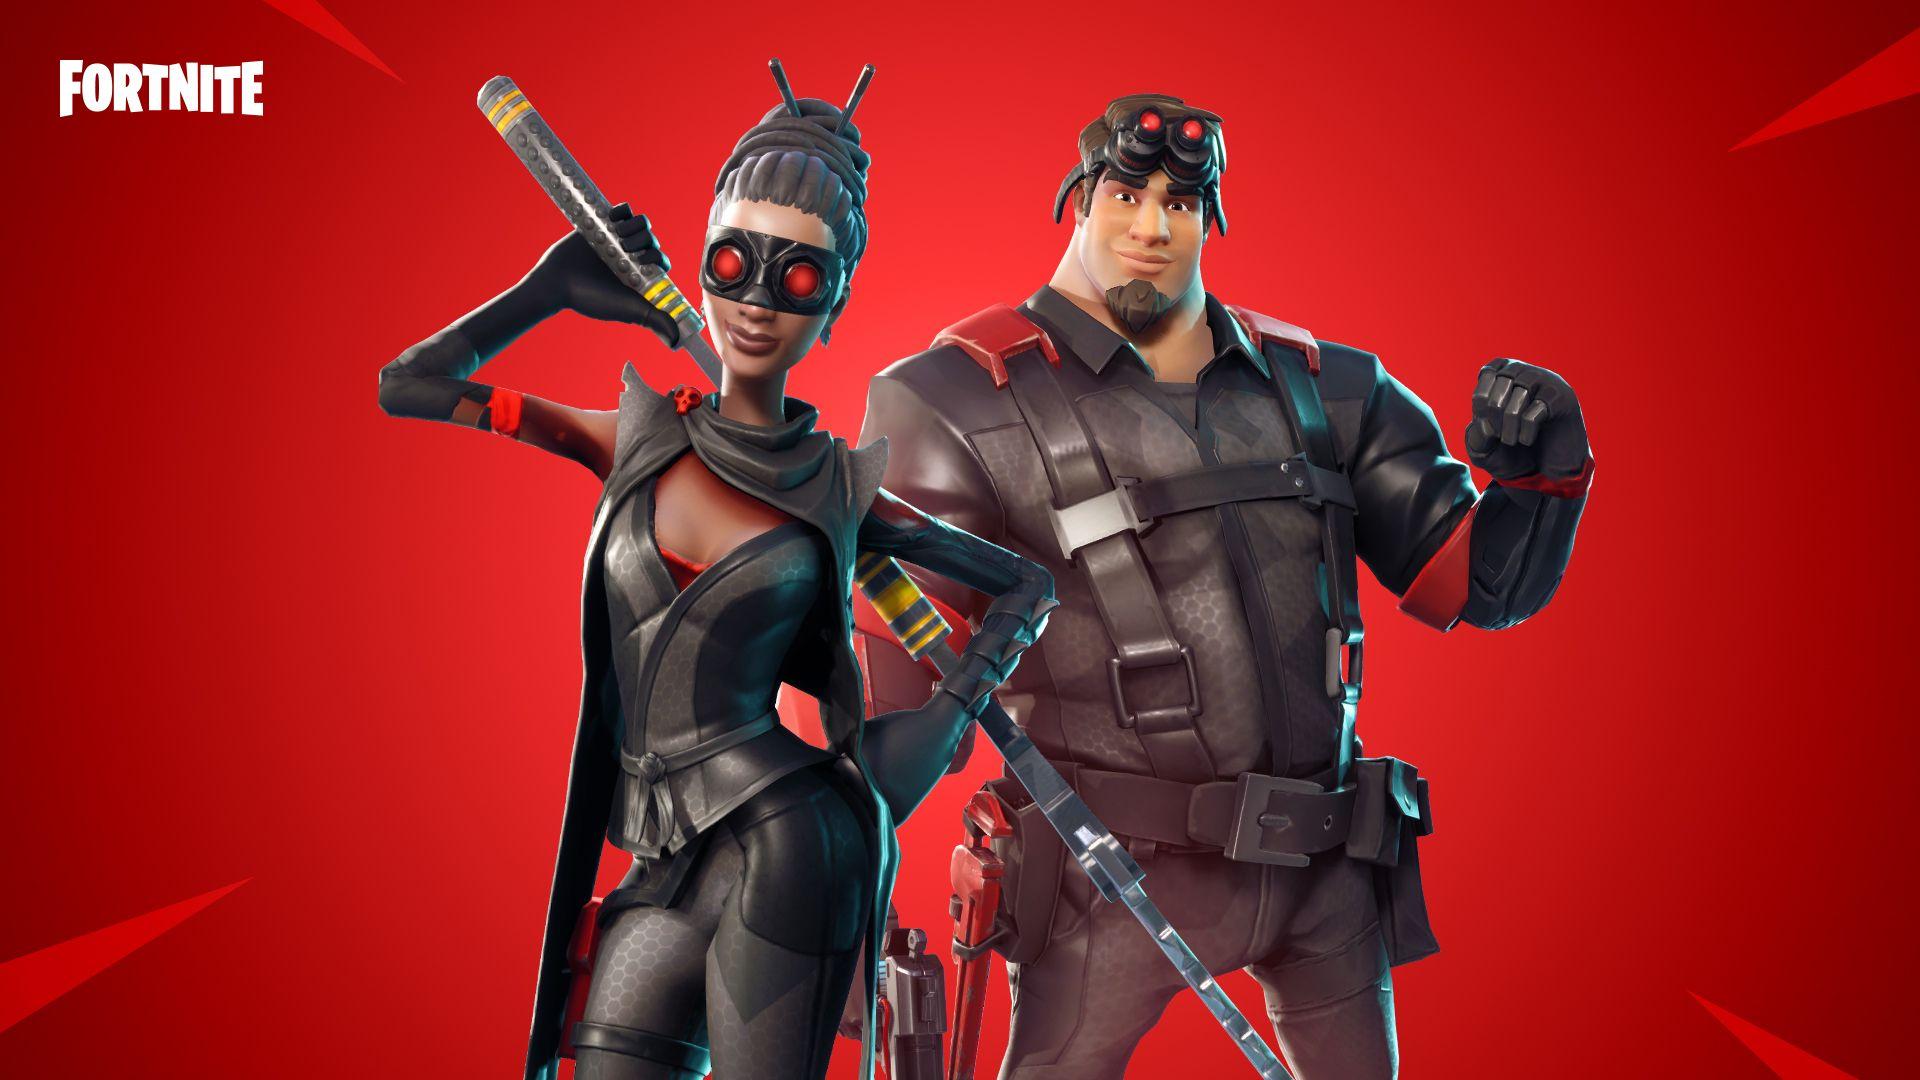 Blockbuster Fortnite Skin Wallpapers Top Free Blockbuster Fortnite - 1920x1080 fortnite on twitter it s a movie marathon at epic and the